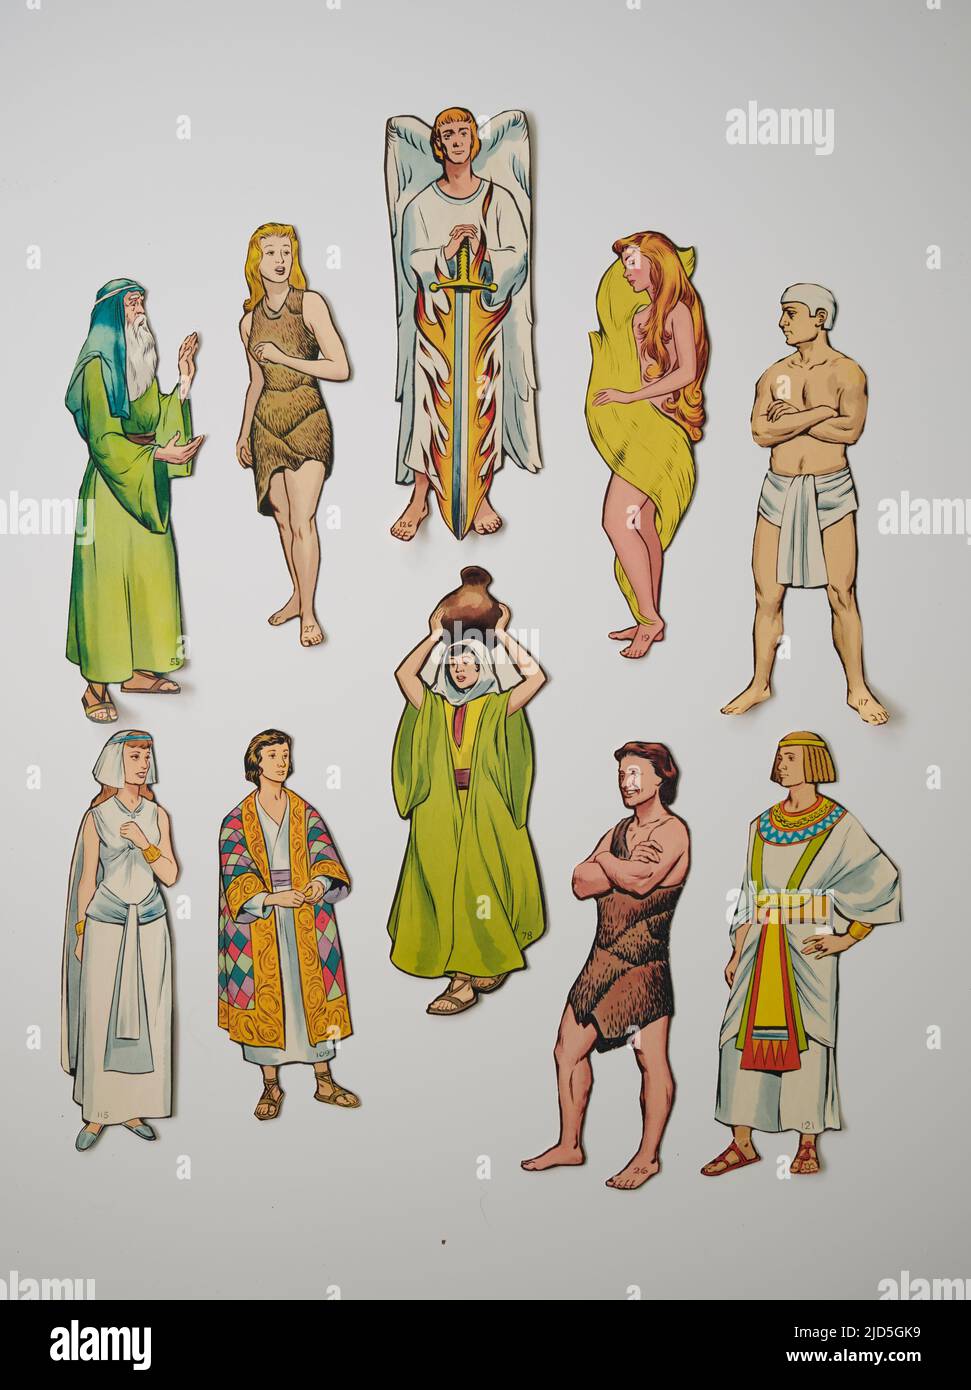 Old Bible Study Educational Cut out Figures Foto Stock